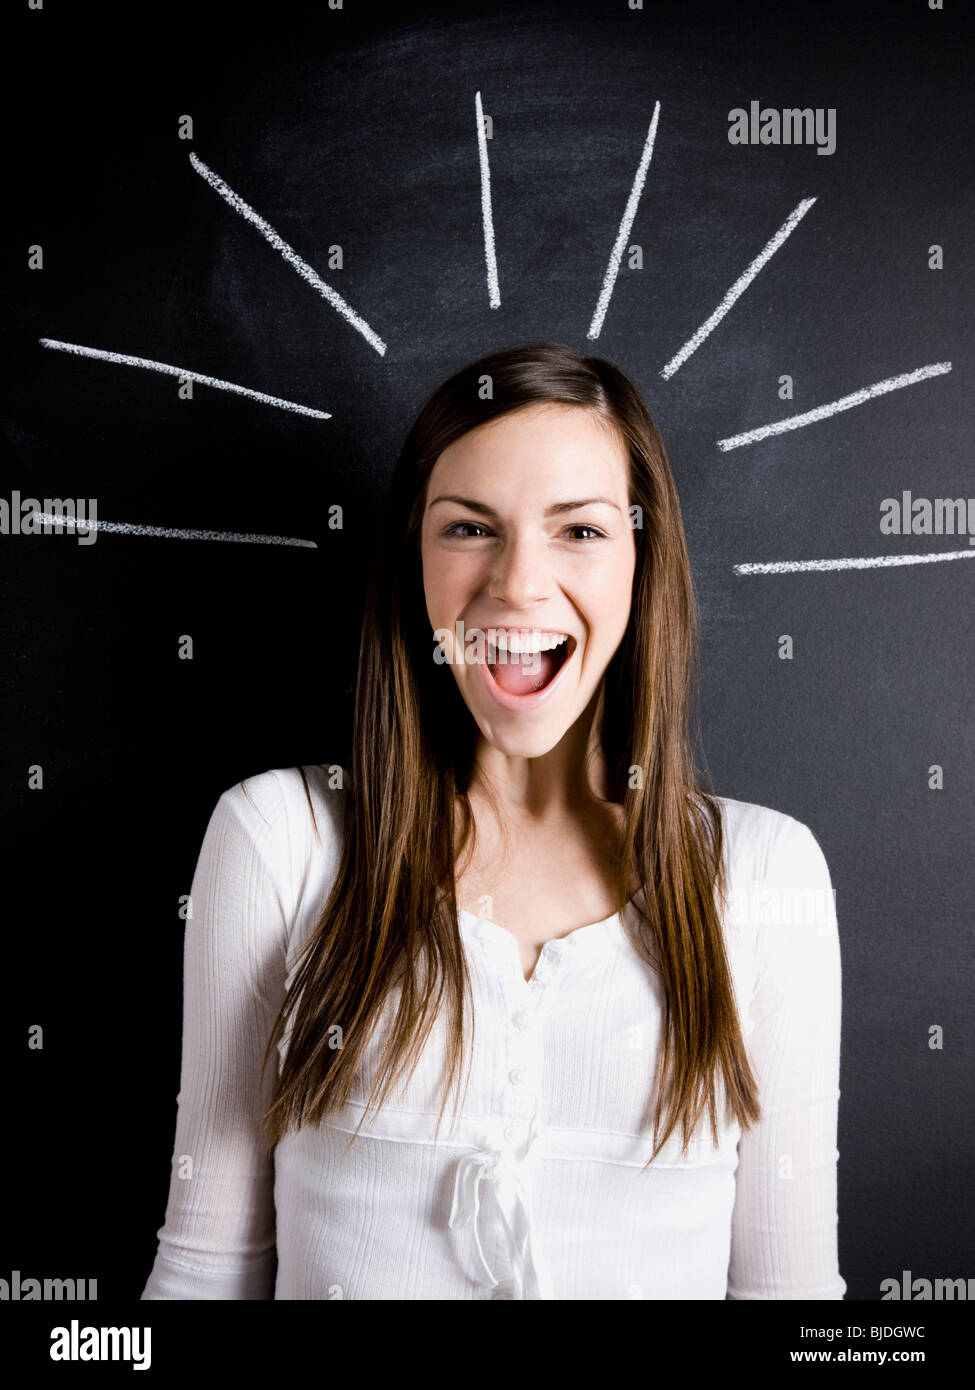 young woman against a chalkboard Stock Photo